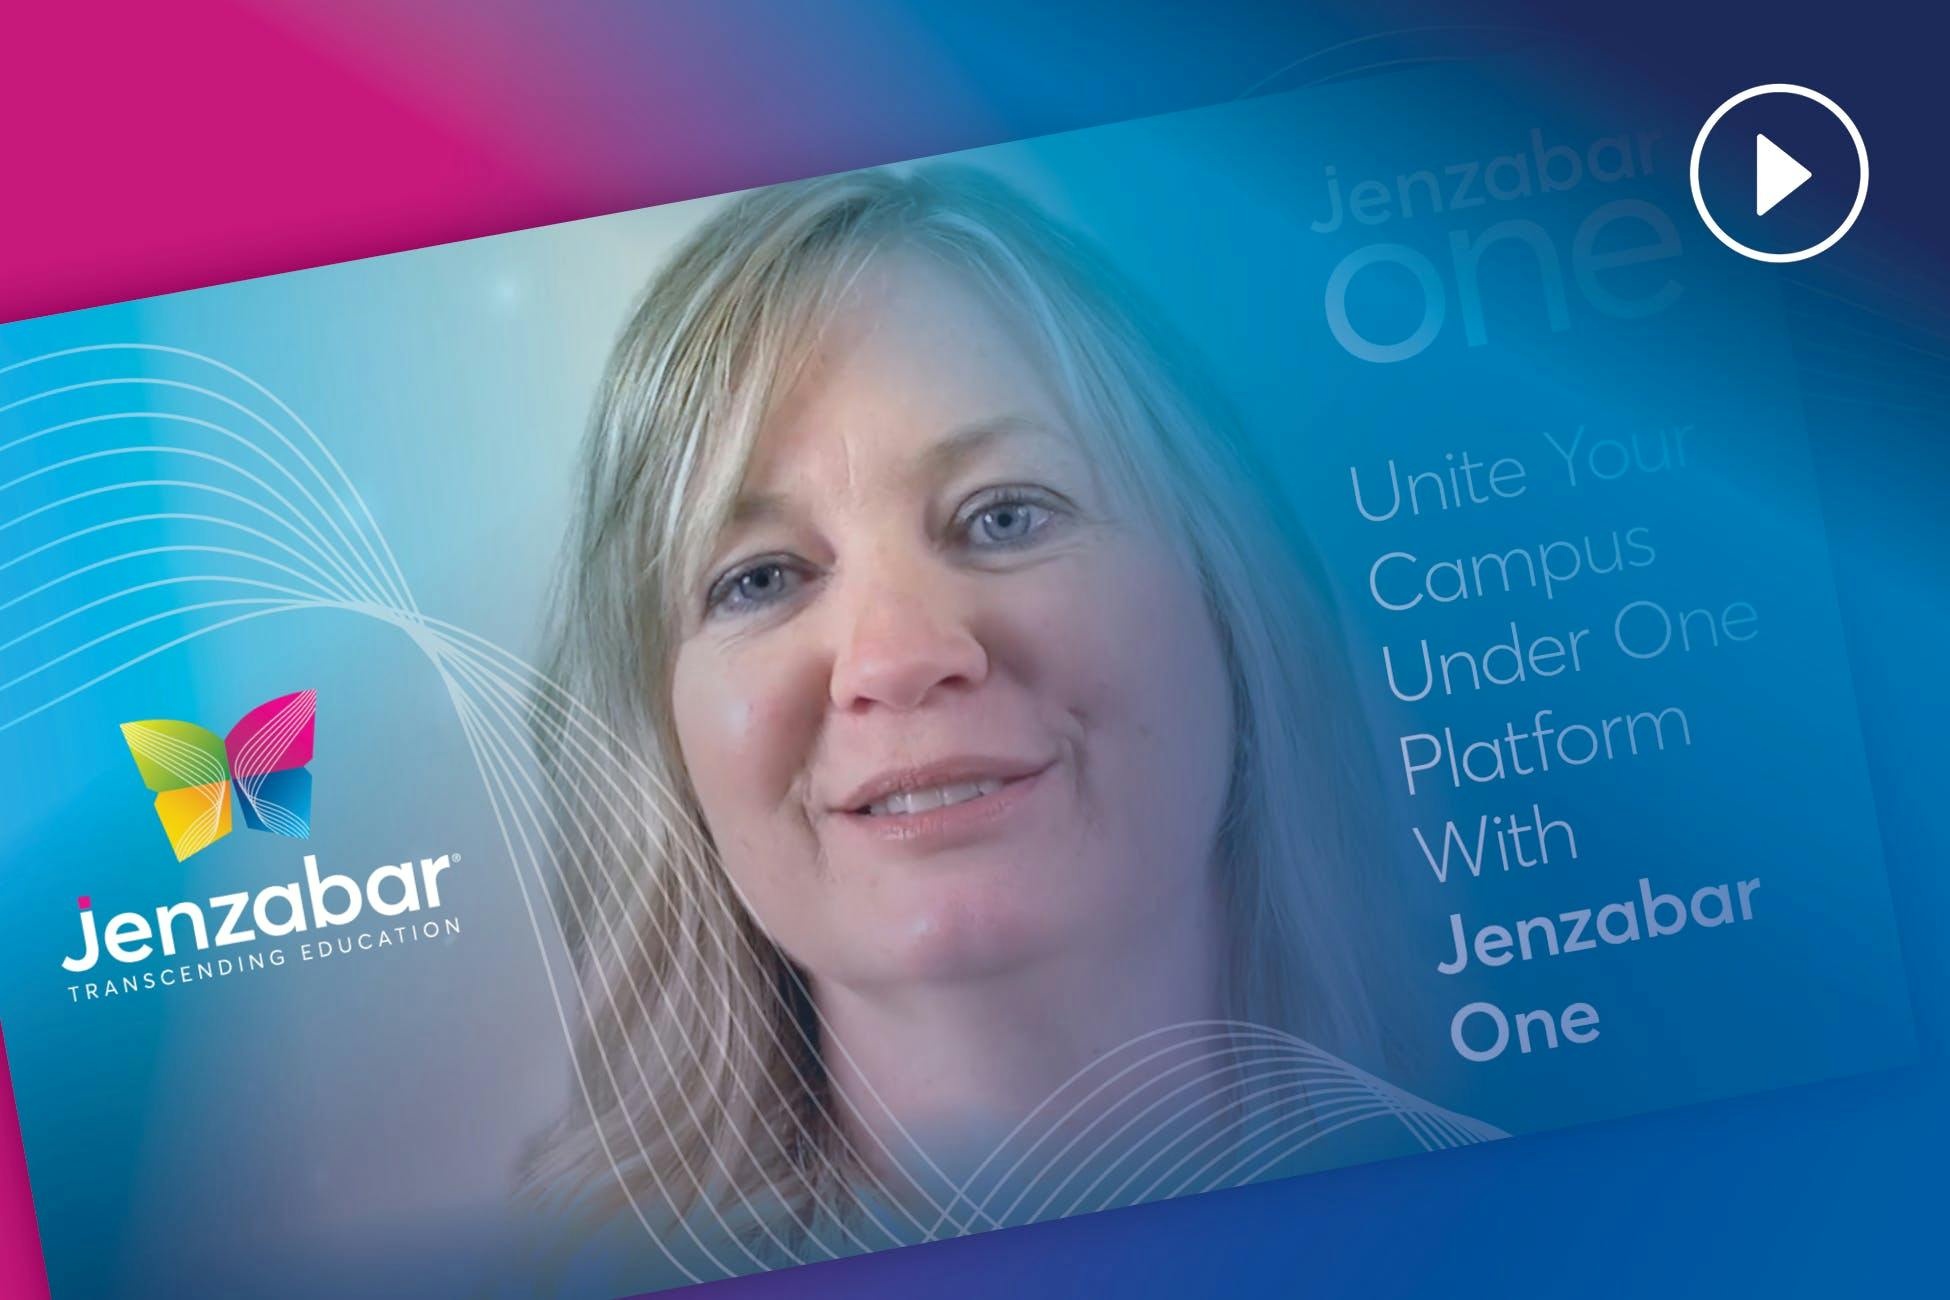 Video: Institutions Use Jenzabar One to Reduce Cost and Transform Student Experiences